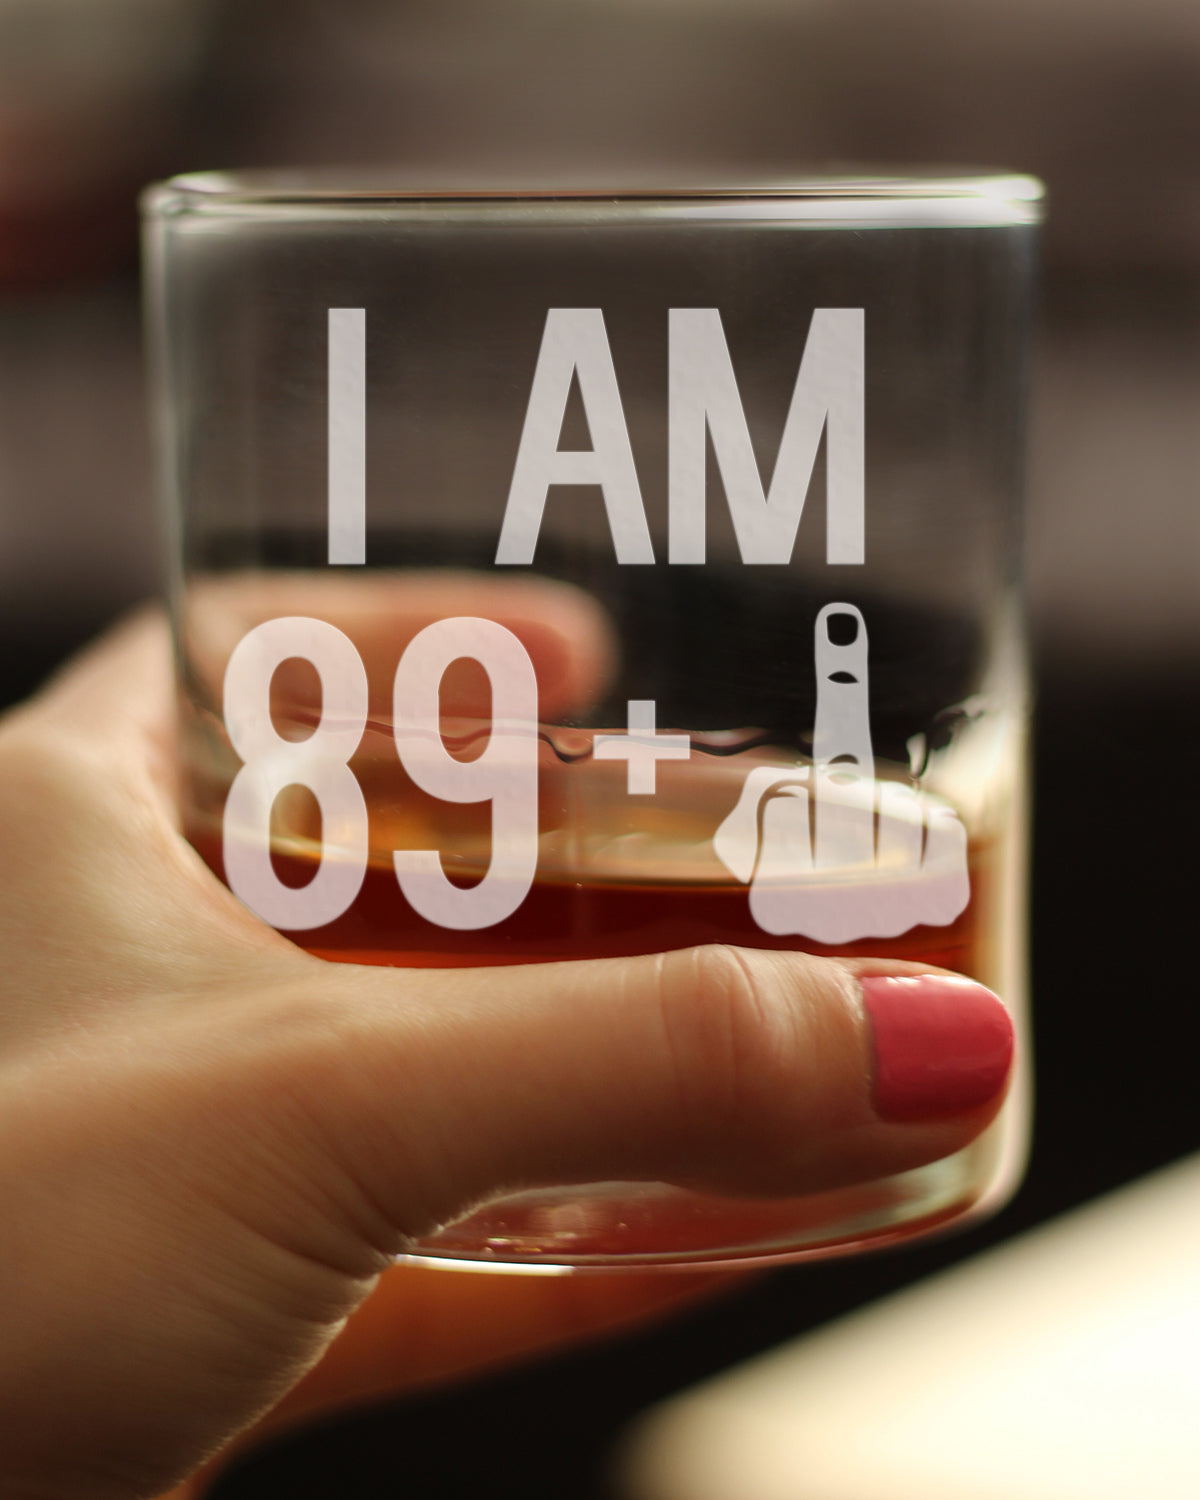 89 + 1 Middle Finger - Funny 90th Birthday Whiskey Rocks Glass Gifts for Men &amp; Women Turning 90 - Fun Whisky Drinking Tumbler